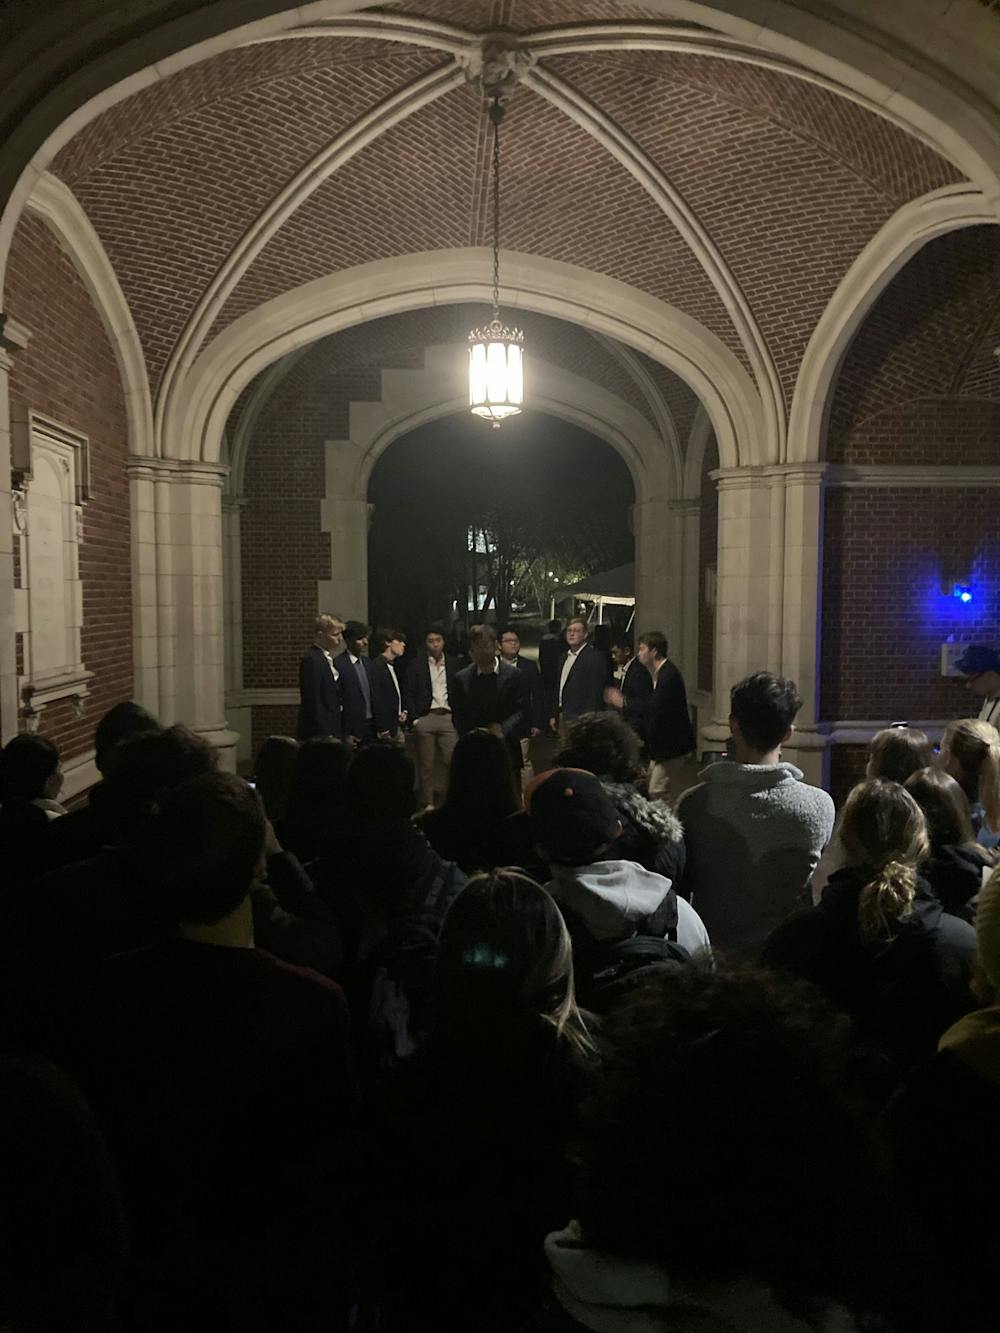 In an arch, at night, a group of formally-dressed men stand in a semi-circle.